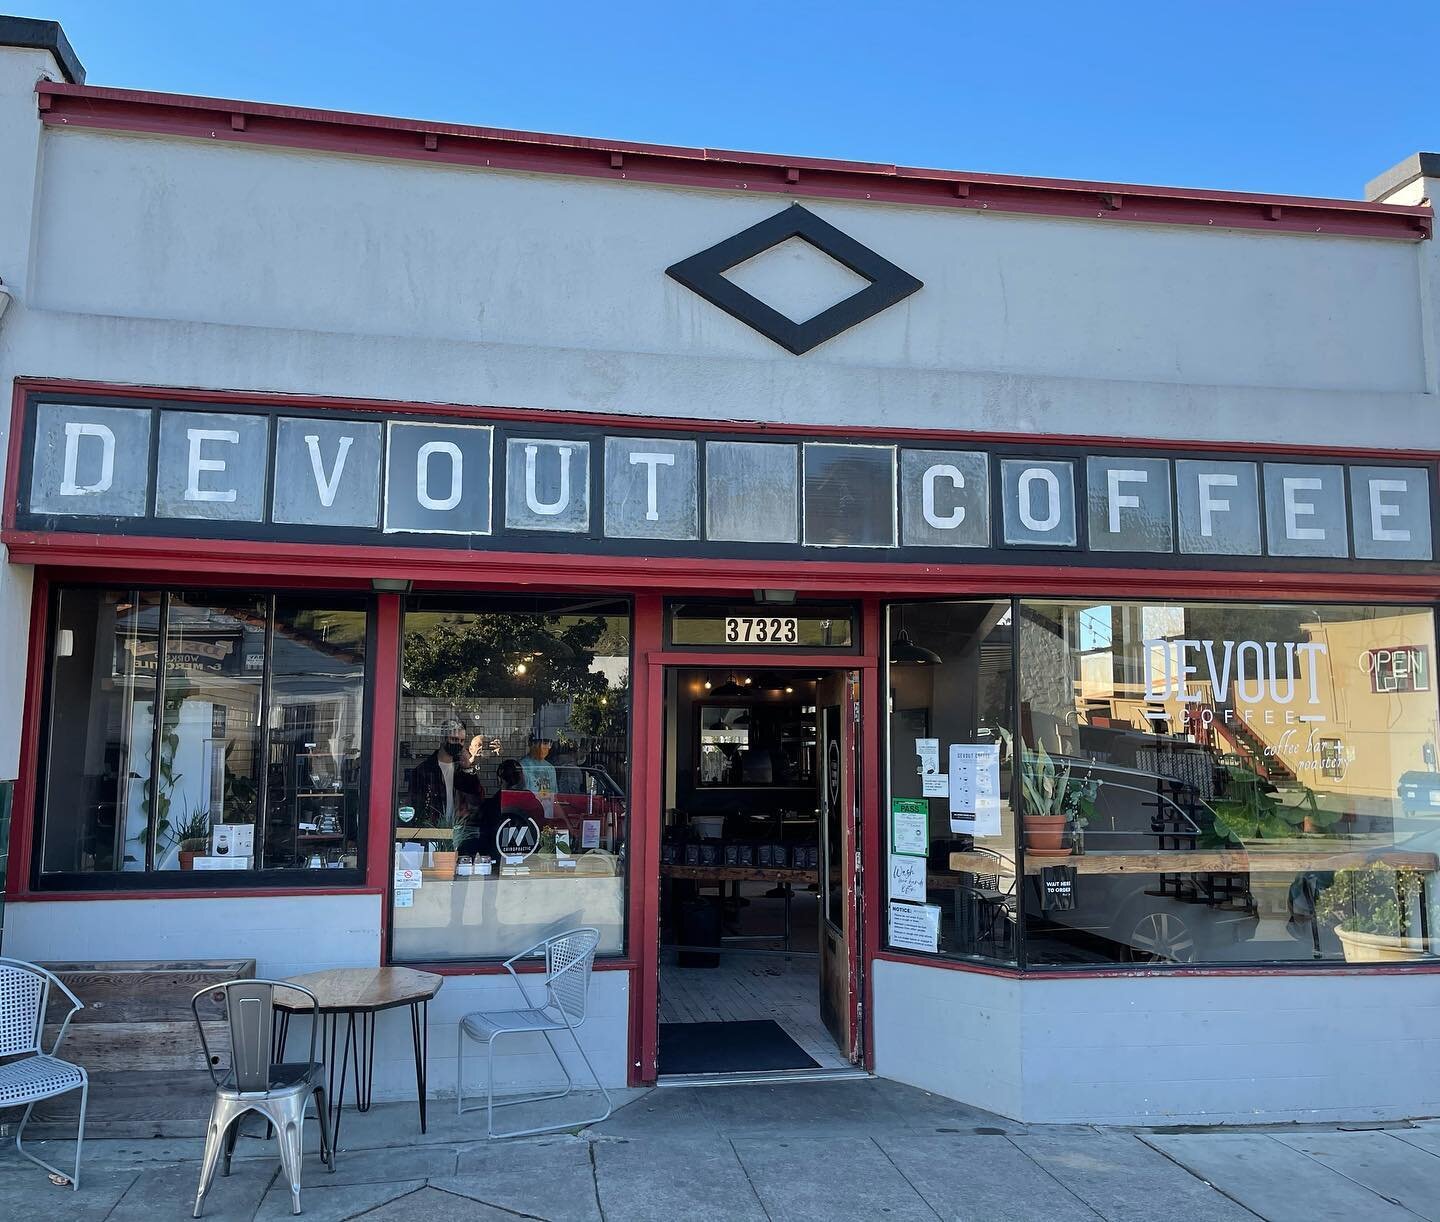 Stopped for that morning pick me up. I recommend the Gibraltar and a pour over. I&rsquo;m partial to Los Alpes from Honduras. #devoutbrewing #devoutcoffee #devoutcoffeeroasters #inmotionchiropractic #inmotionsportschiro #inmotionsportschiropractic #m